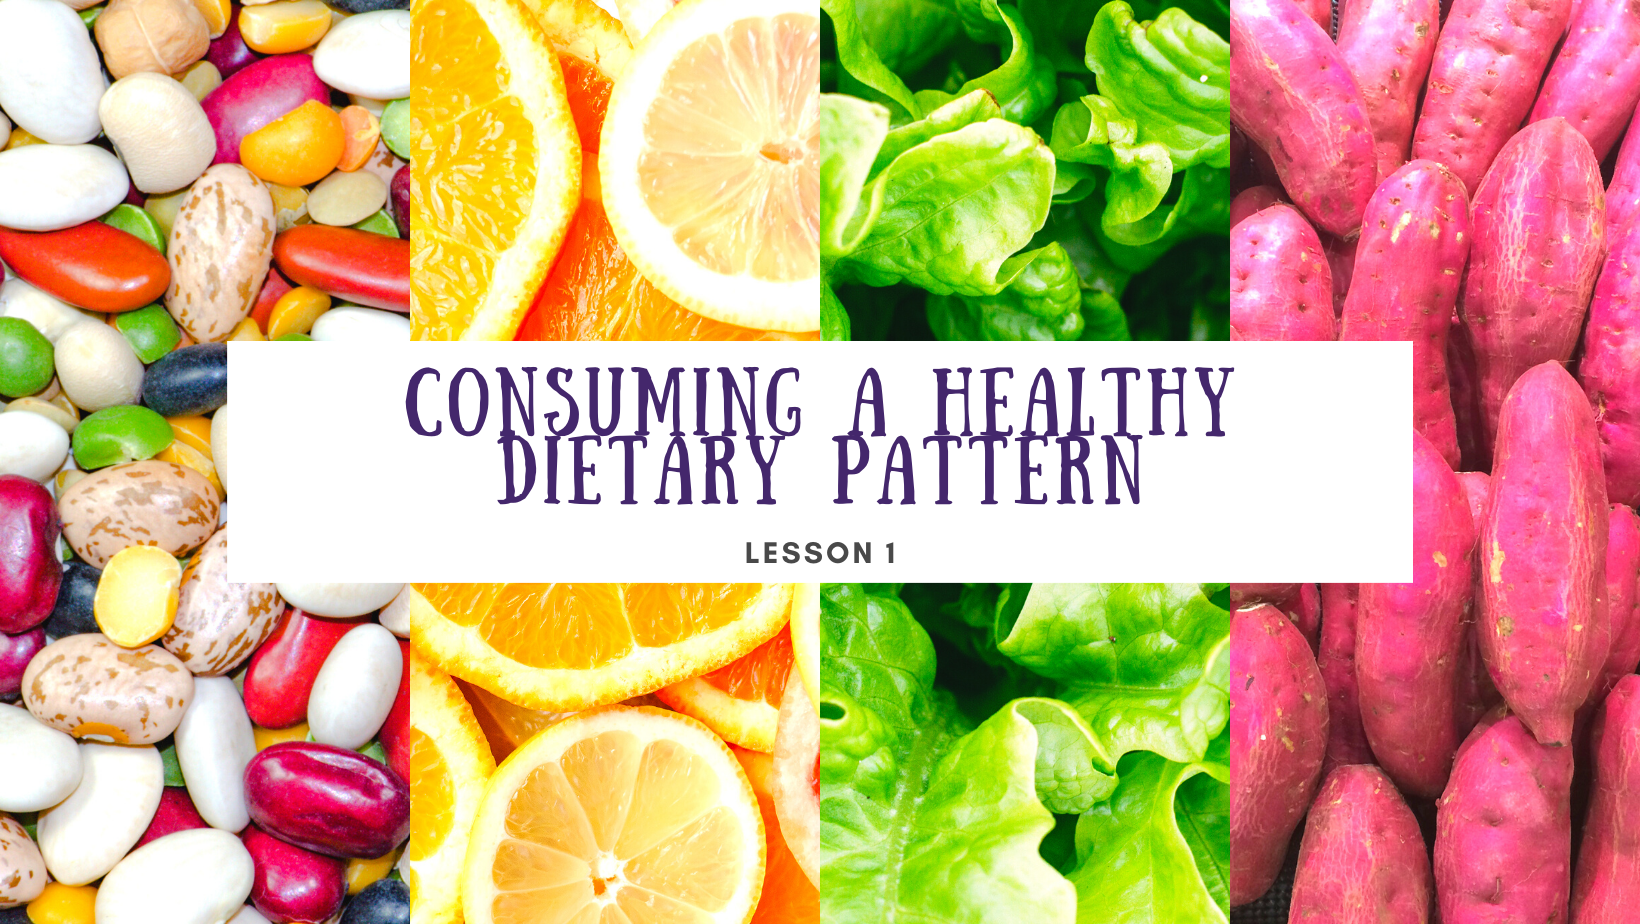 Lesson 1 Consuming a healthy dietary pattern